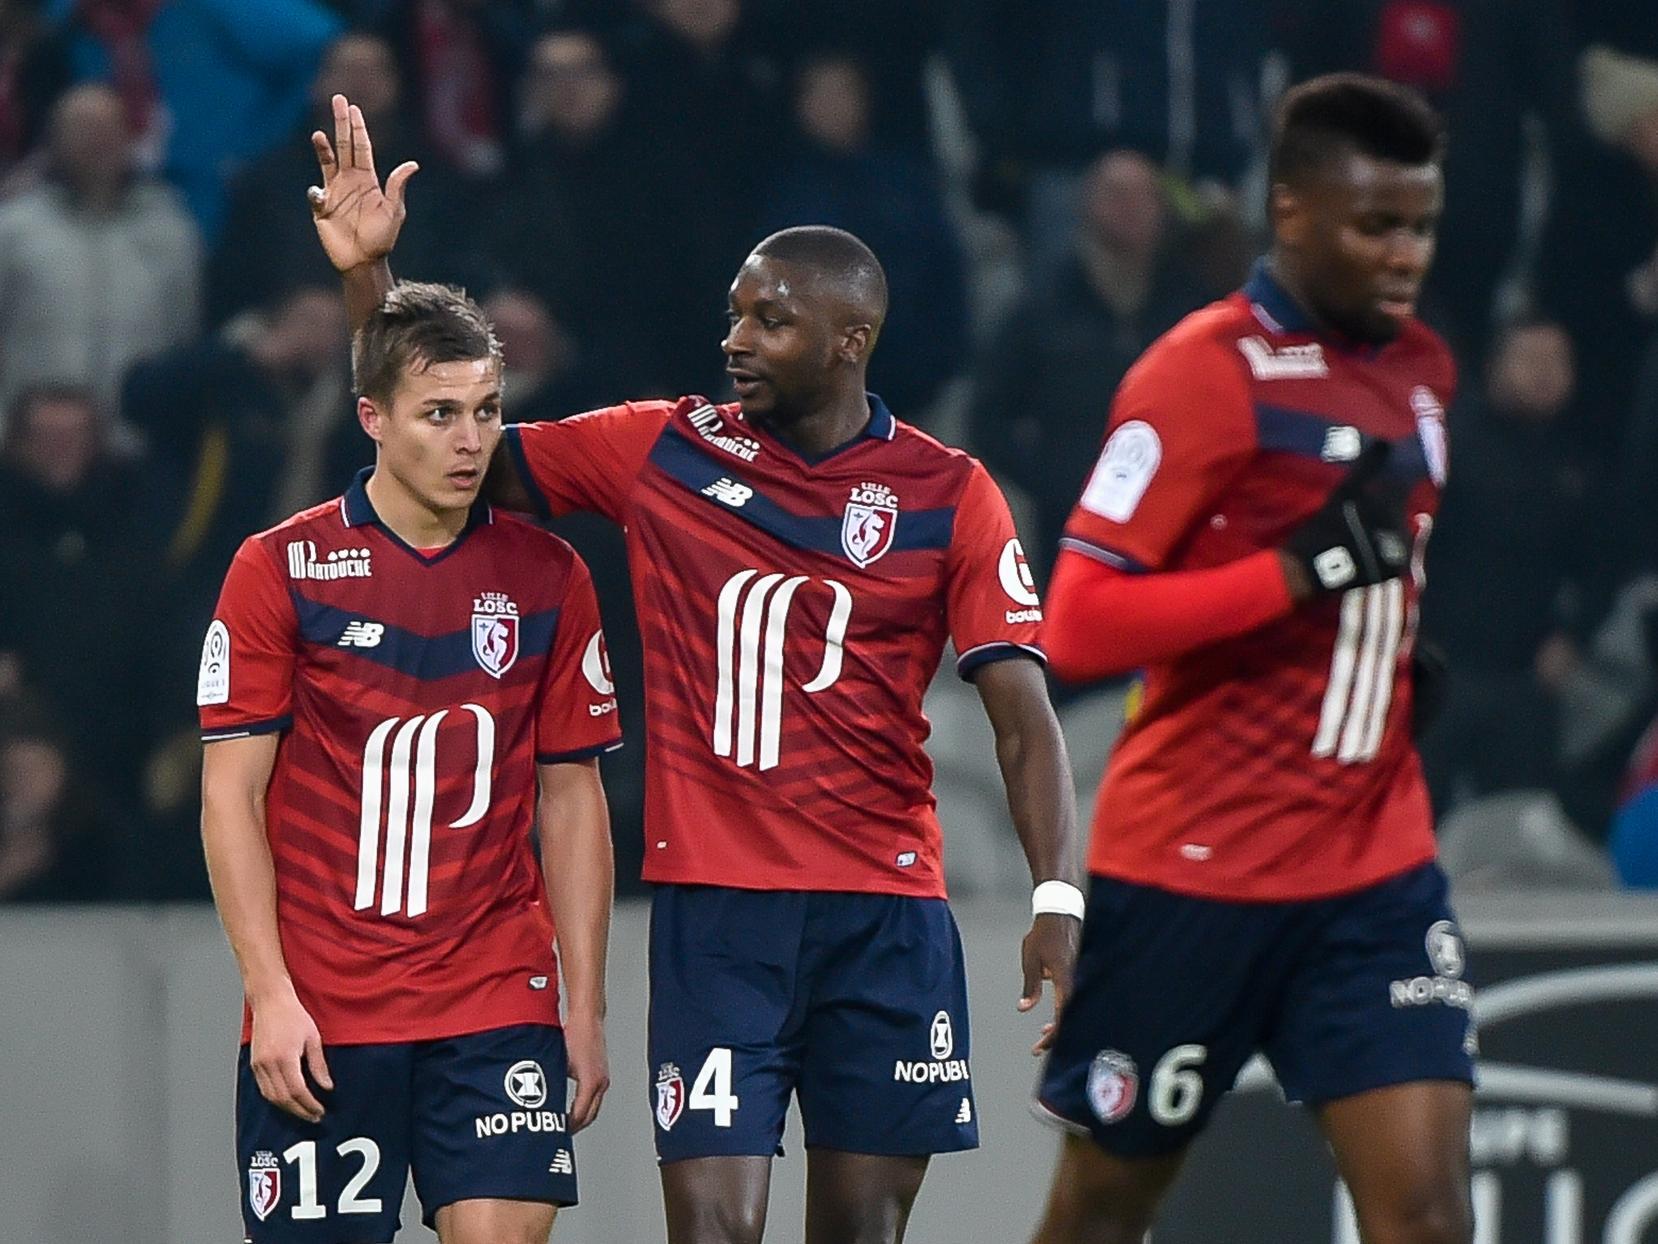 The 30-year-old Senegal international midfielder started his career at PSG in France and boasts three French Cup wins. Recently left Bordeaux after a two-season stint.